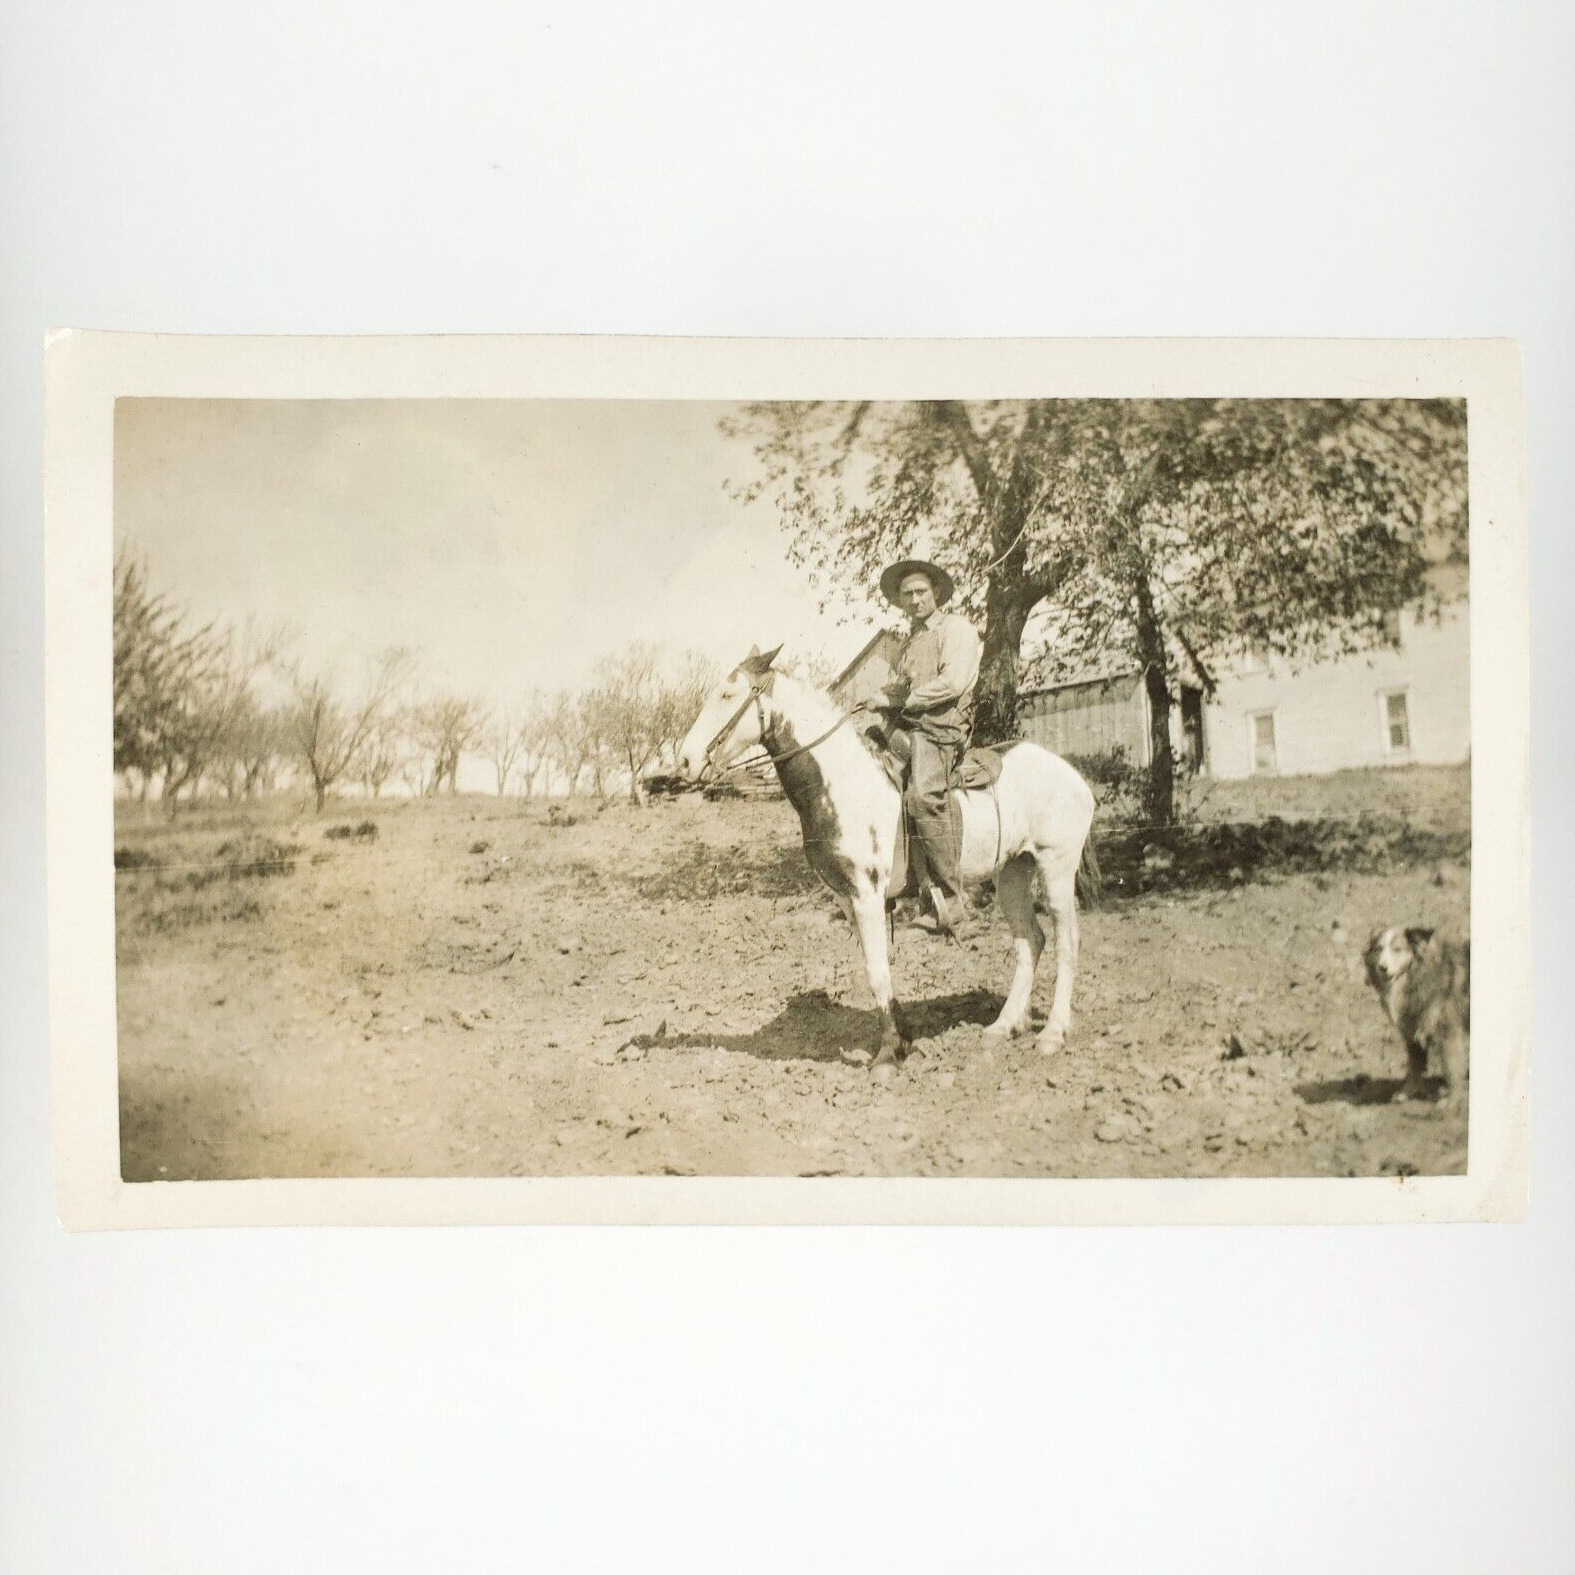 Cowboy Riding Horse Ranch Photo 1920s Old West Pet Dog Western Snapshot A4334